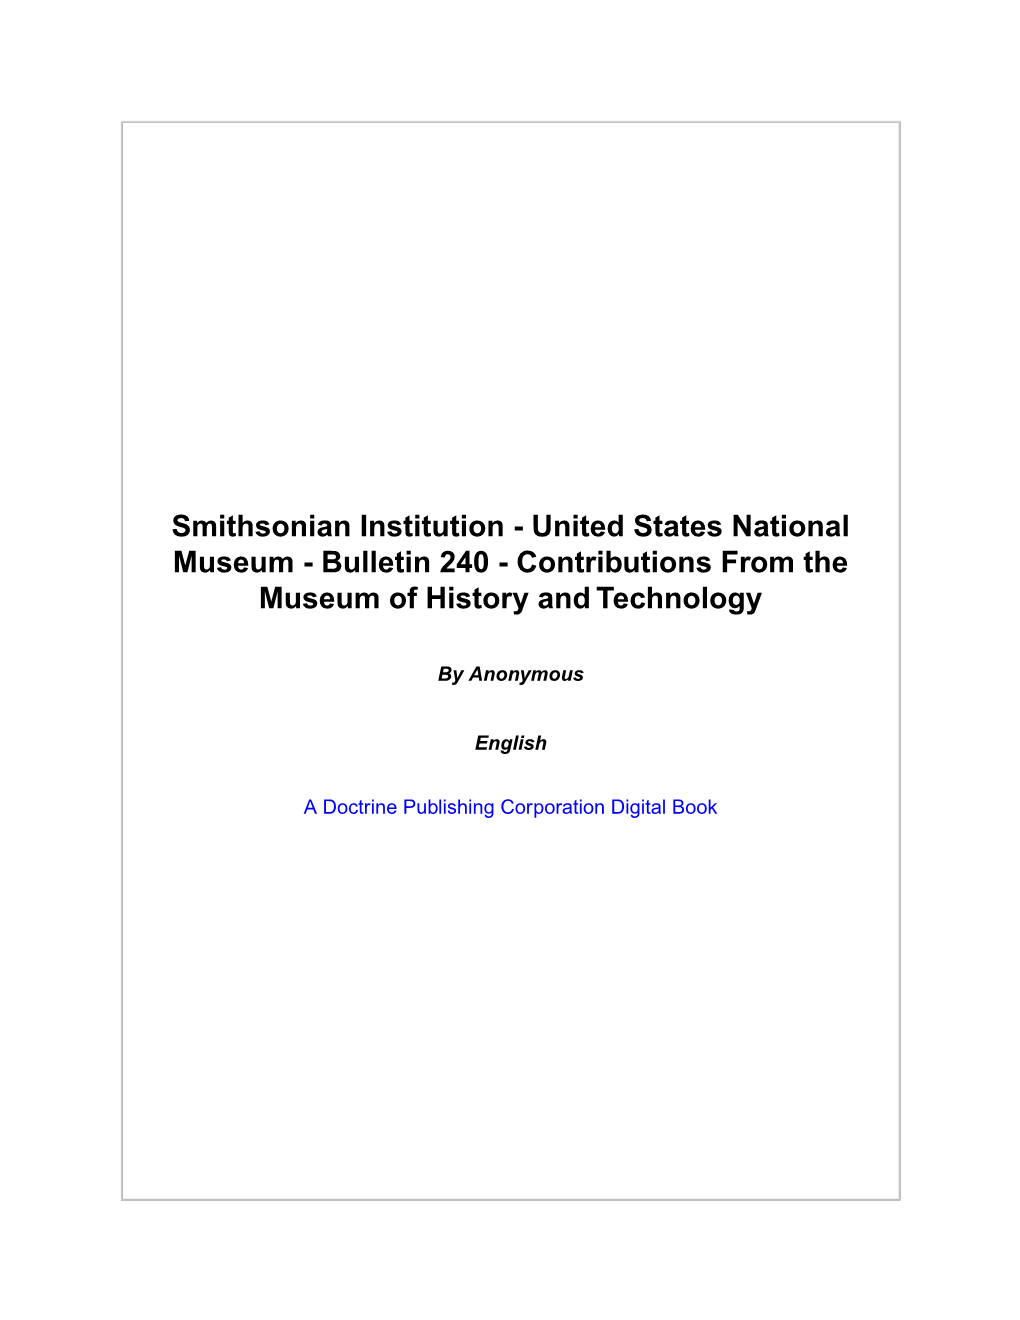 Smithsonian Institution - United States National Museum - Bulletin 240 - Contributions from the Museum of History and Technology